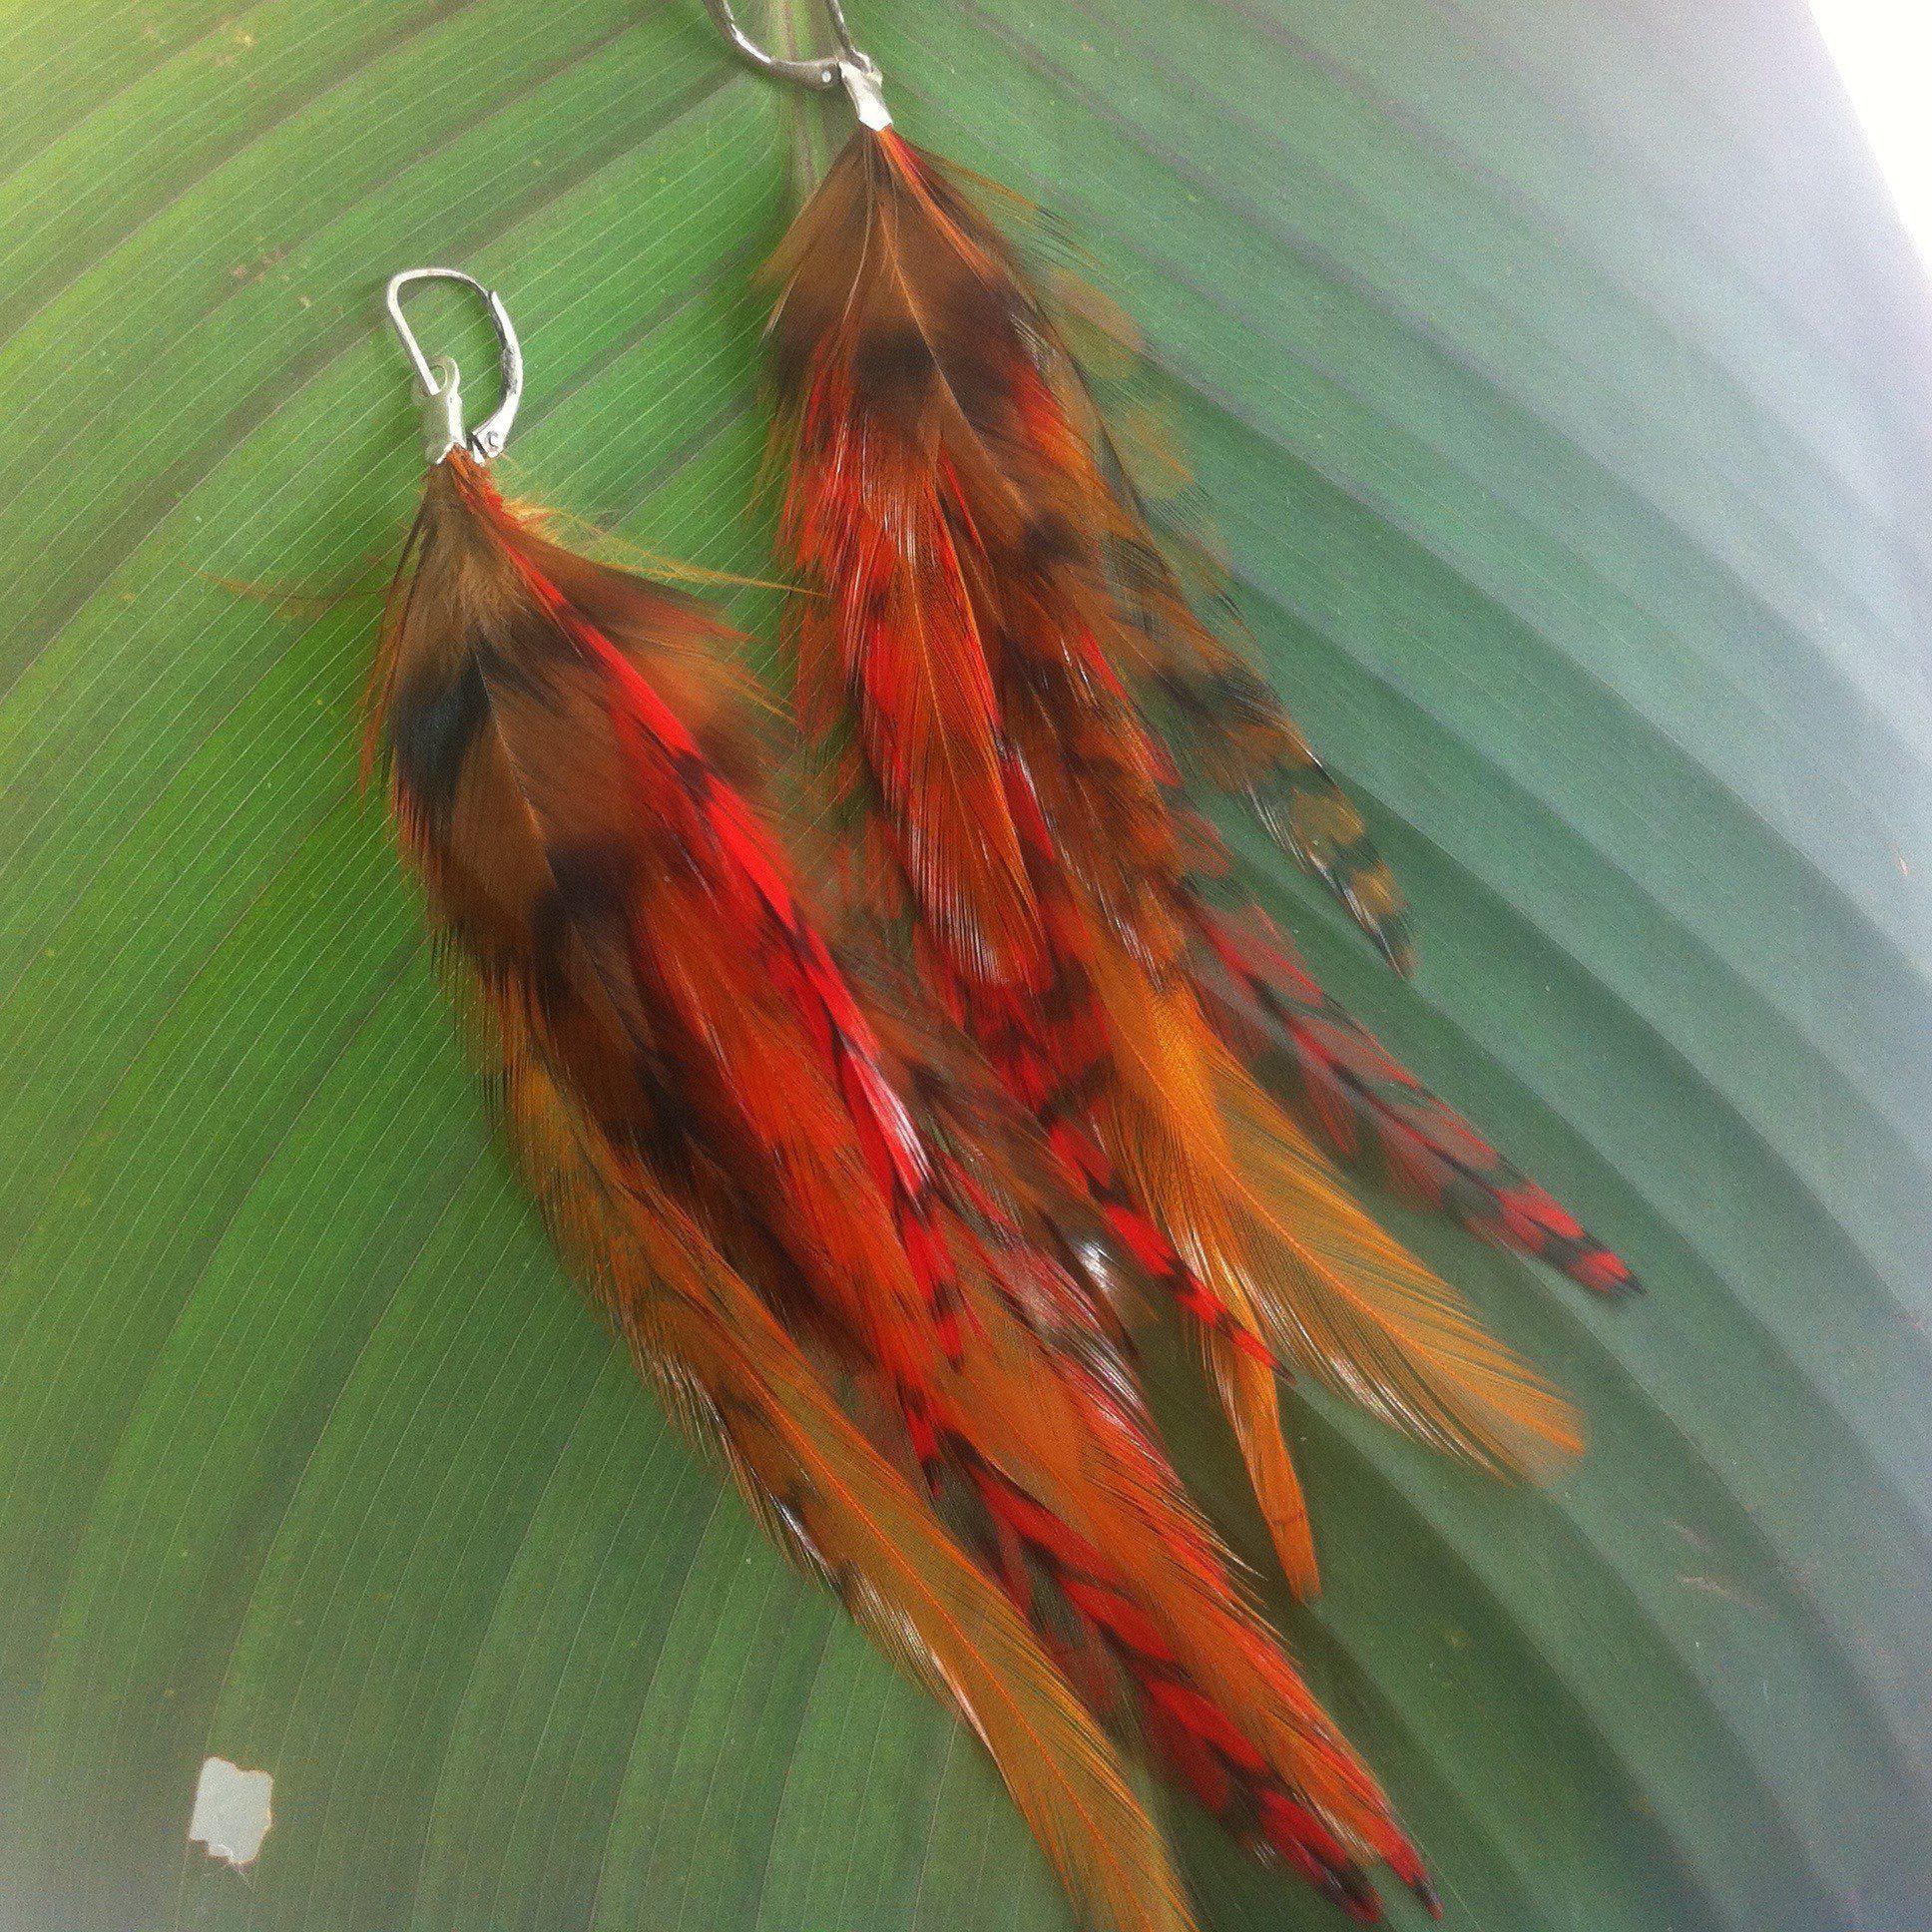 Natural Jewelry :|: Dragons Breath, Feather Earrings, 5-6 inch Long.